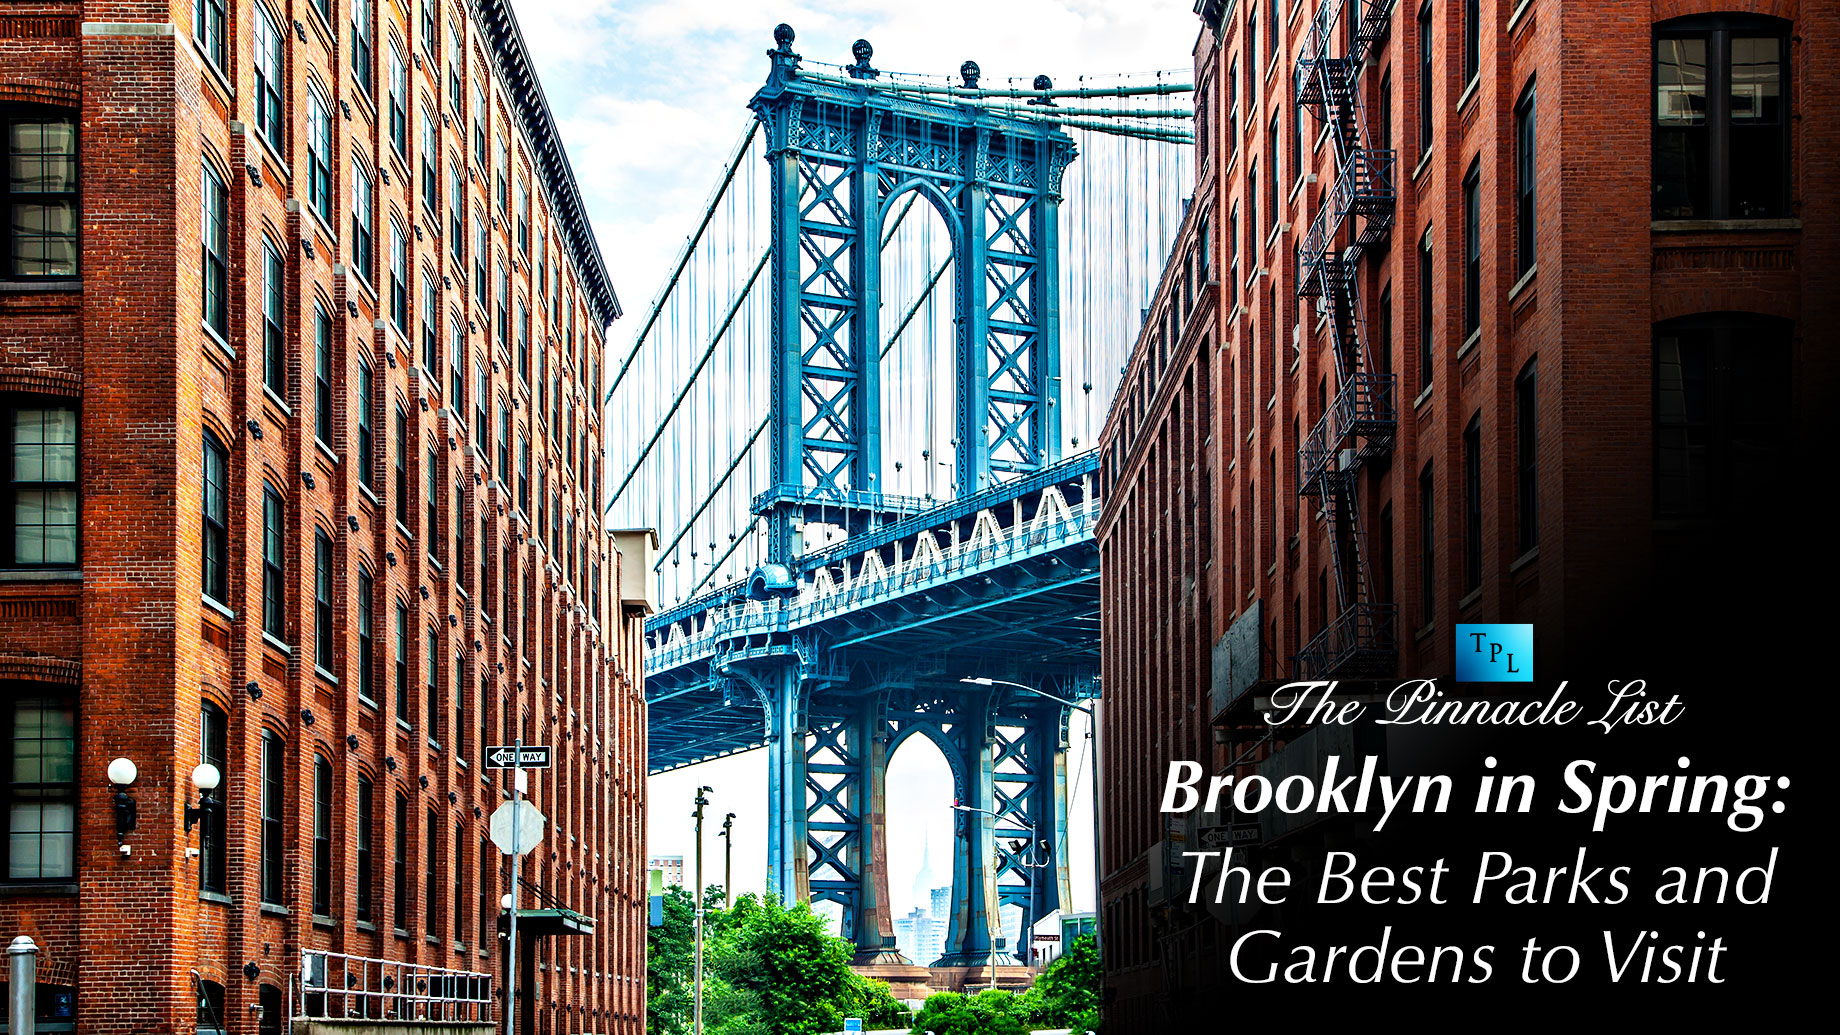 Brooklyn in Spring: The Best Parks and Gardens to Visit